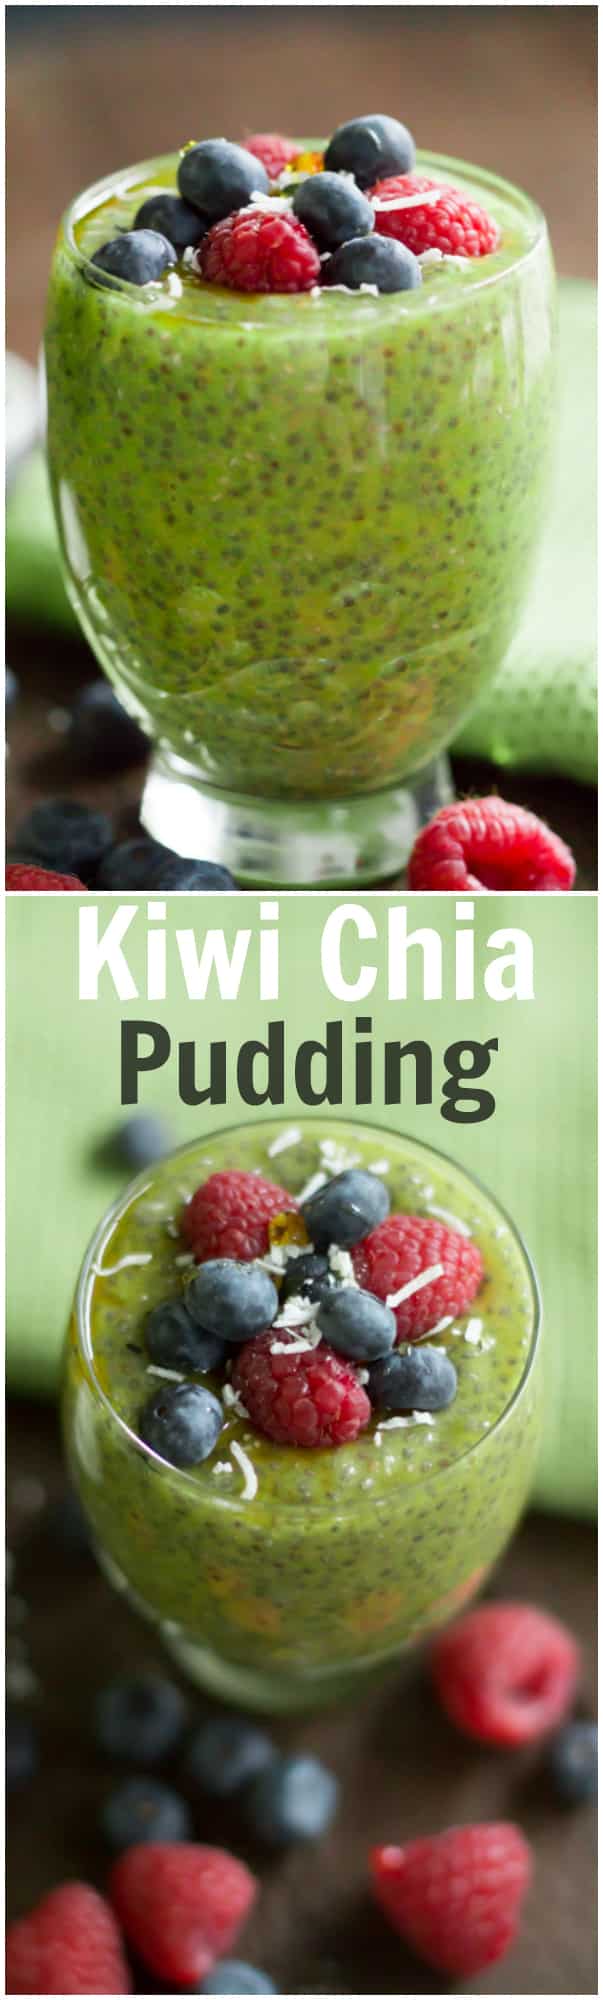 kiwi chia pudding - This Kiwi Chia Pudding is made with coconut milk, kiwi fruit and maple syrup. It is a great option for a healthy breakfast or a snack in the afternoon.